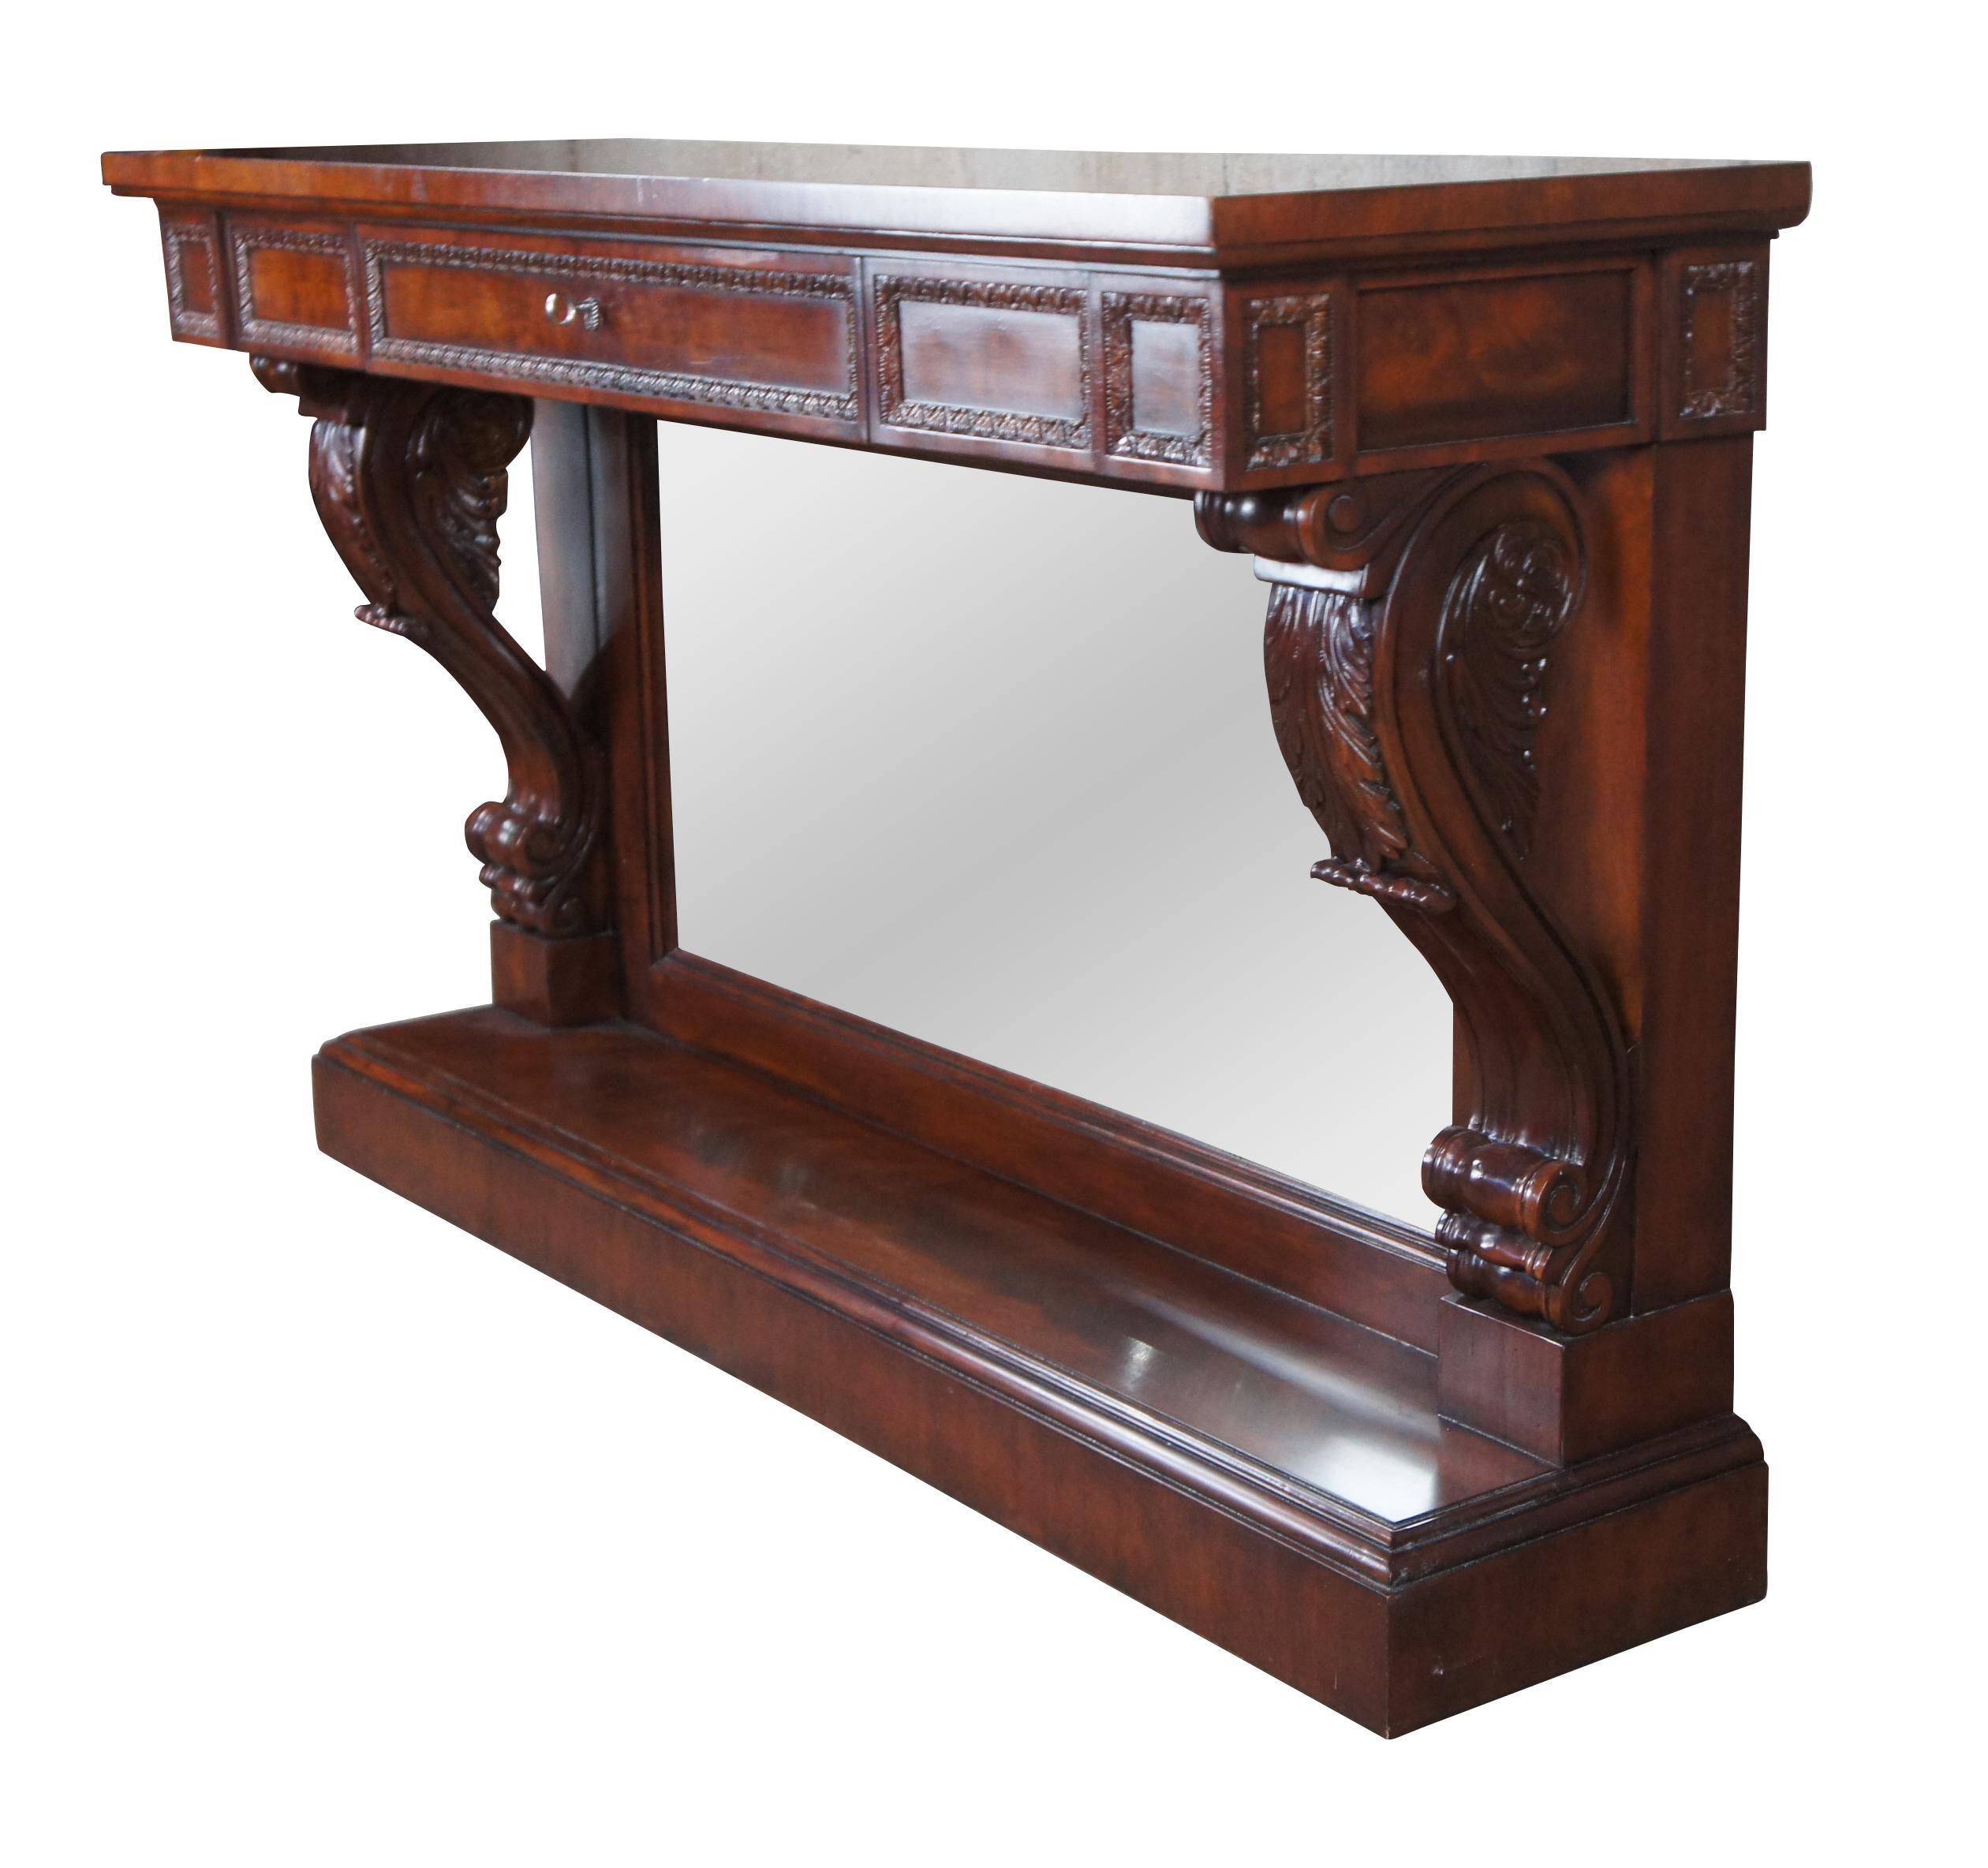 A stately English Regency mirrored pier table by Ralph Lauren, circa 1990s. The rectangular frame is made from a warm brown mahogany with matchbook burled panels. A pronounced top is supported by thick acanthus scrolled corbels over a plinth base.